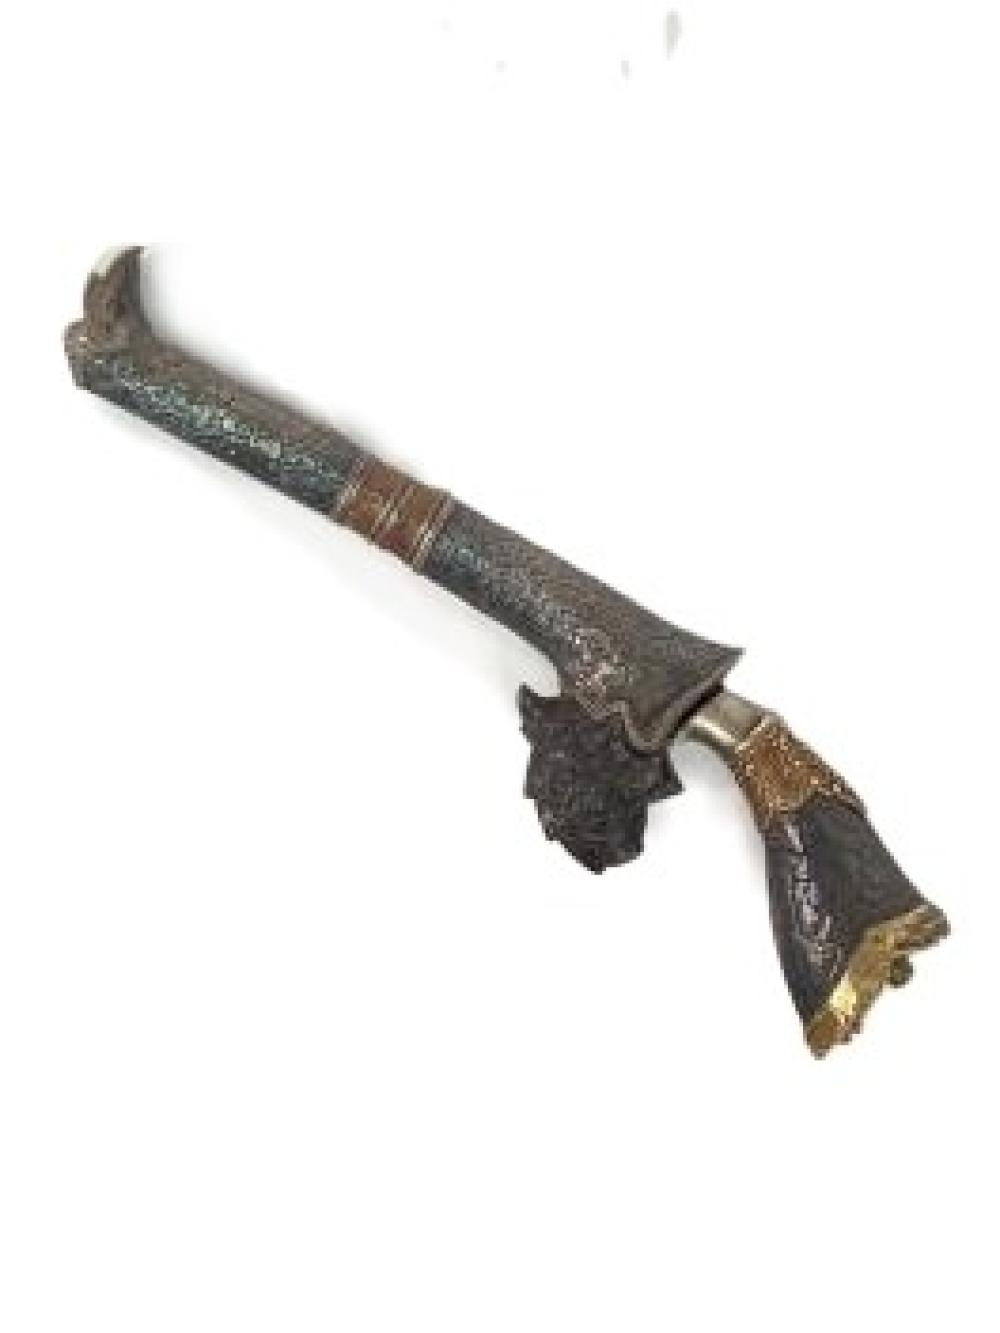 MIDDLE EASTERN SHEATHED DAGGER 2d79db